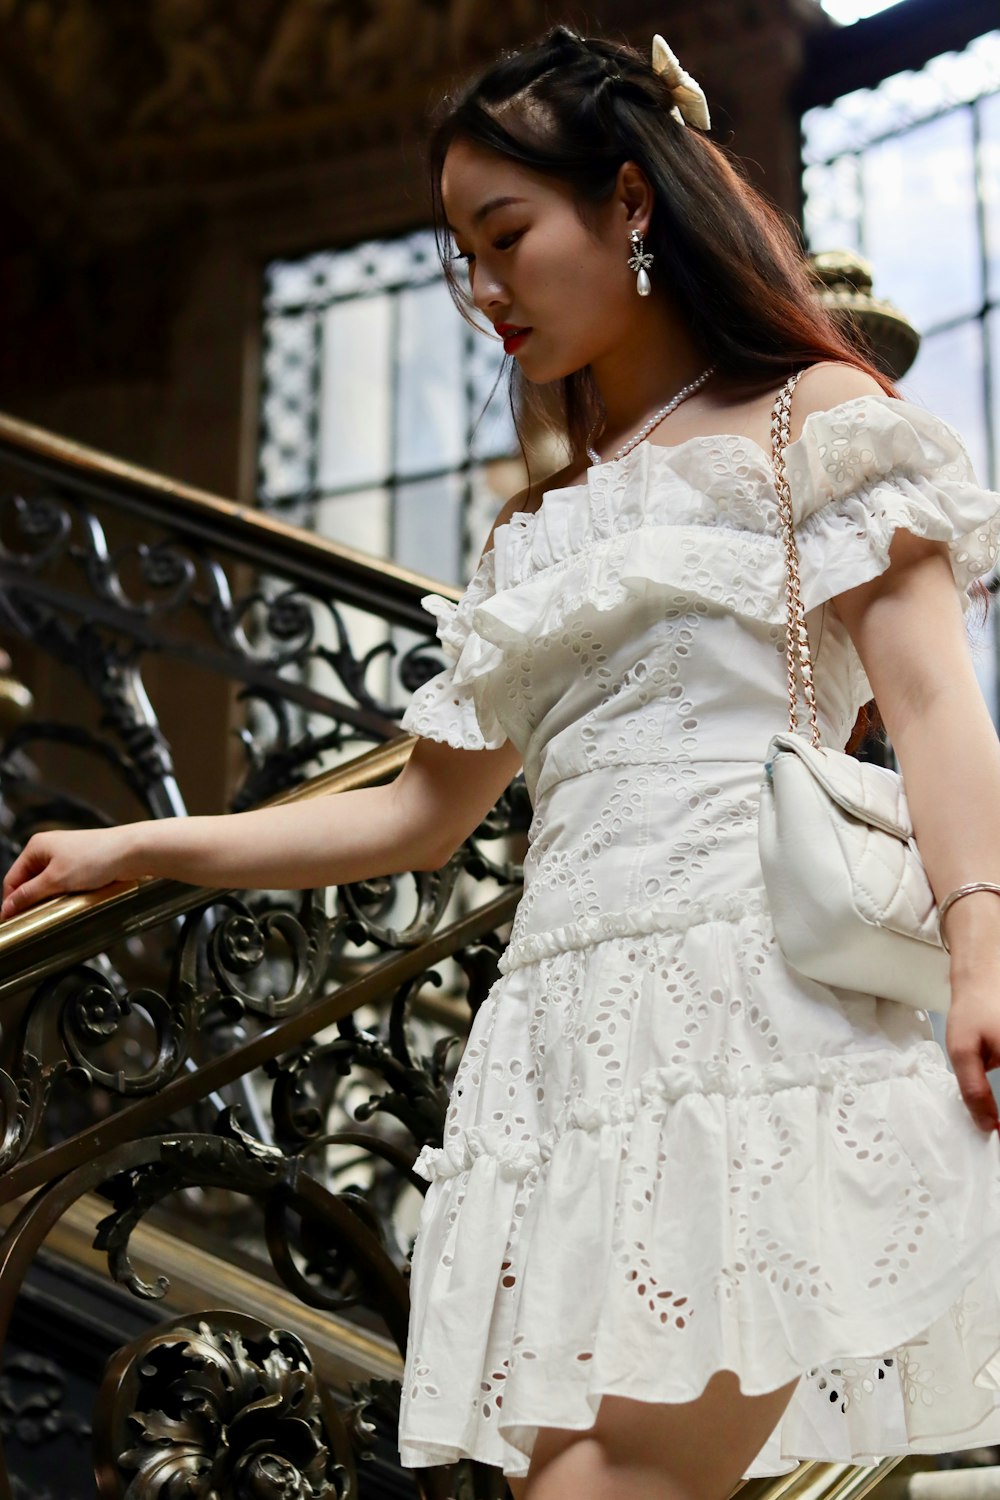 a woman in a white dress is walking down a set of stairs